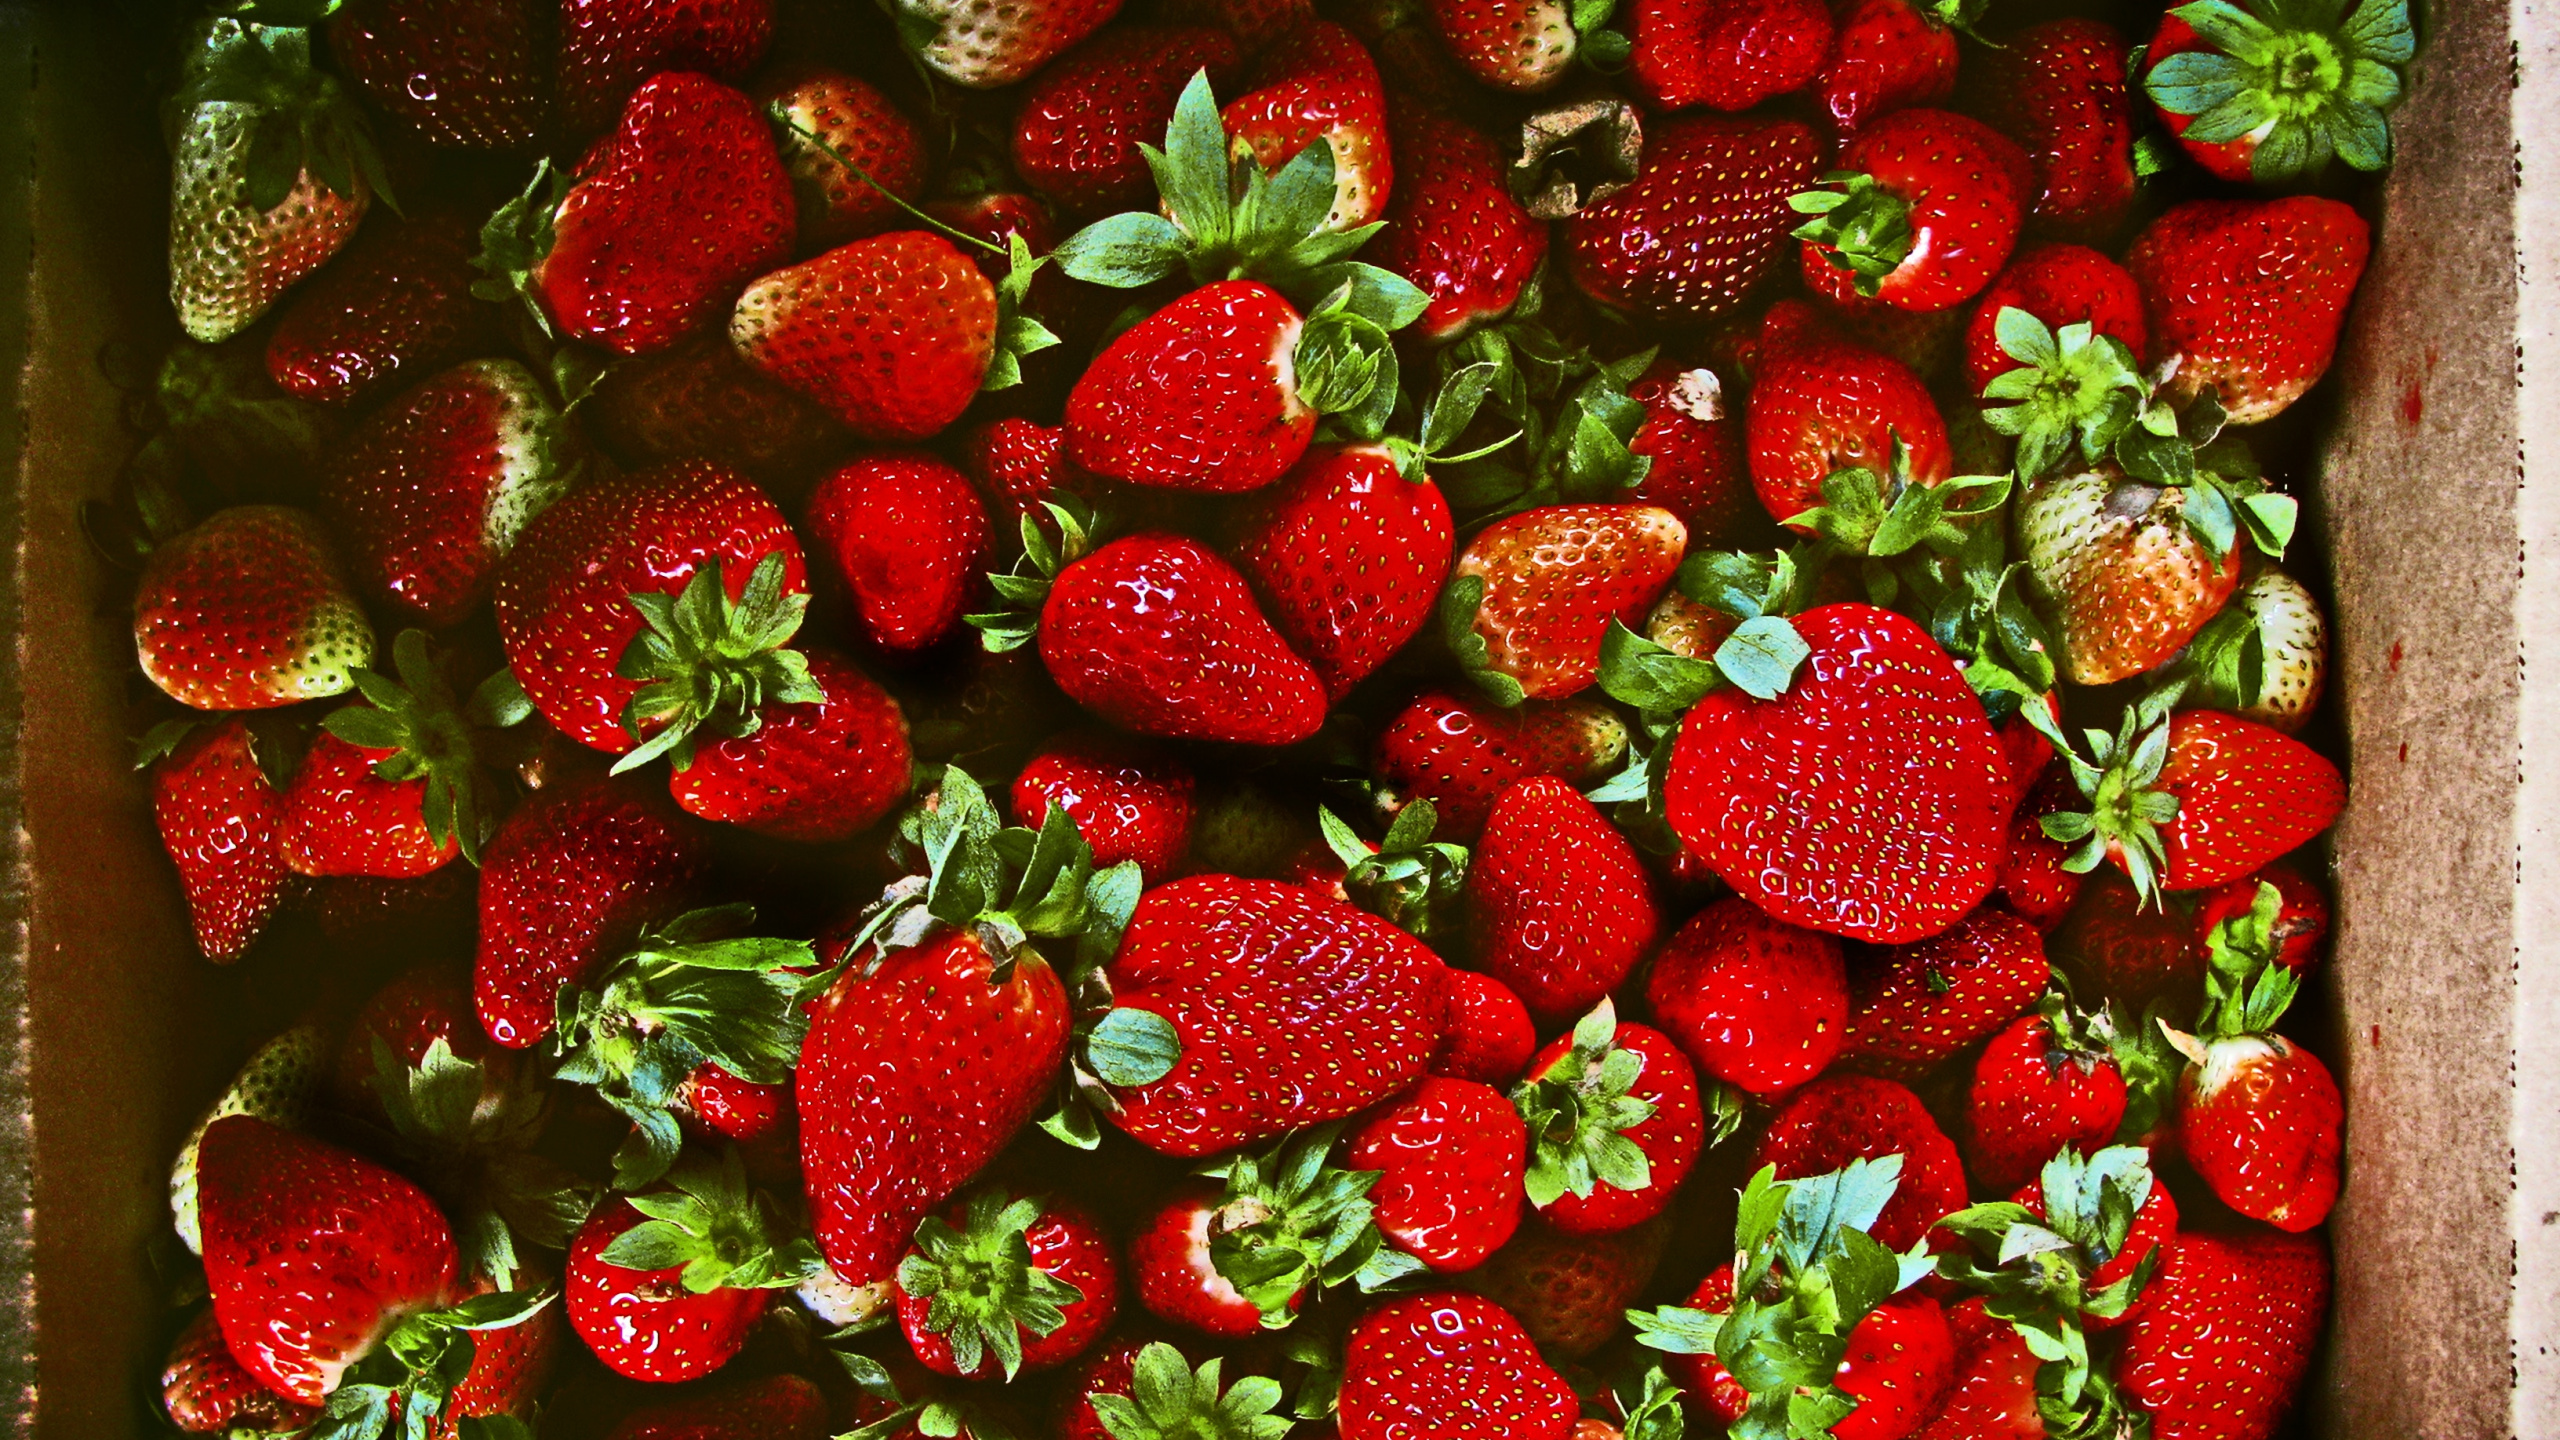 Strawberries in Brown Wooden Container. Wallpaper in 2560x1440 Resolution